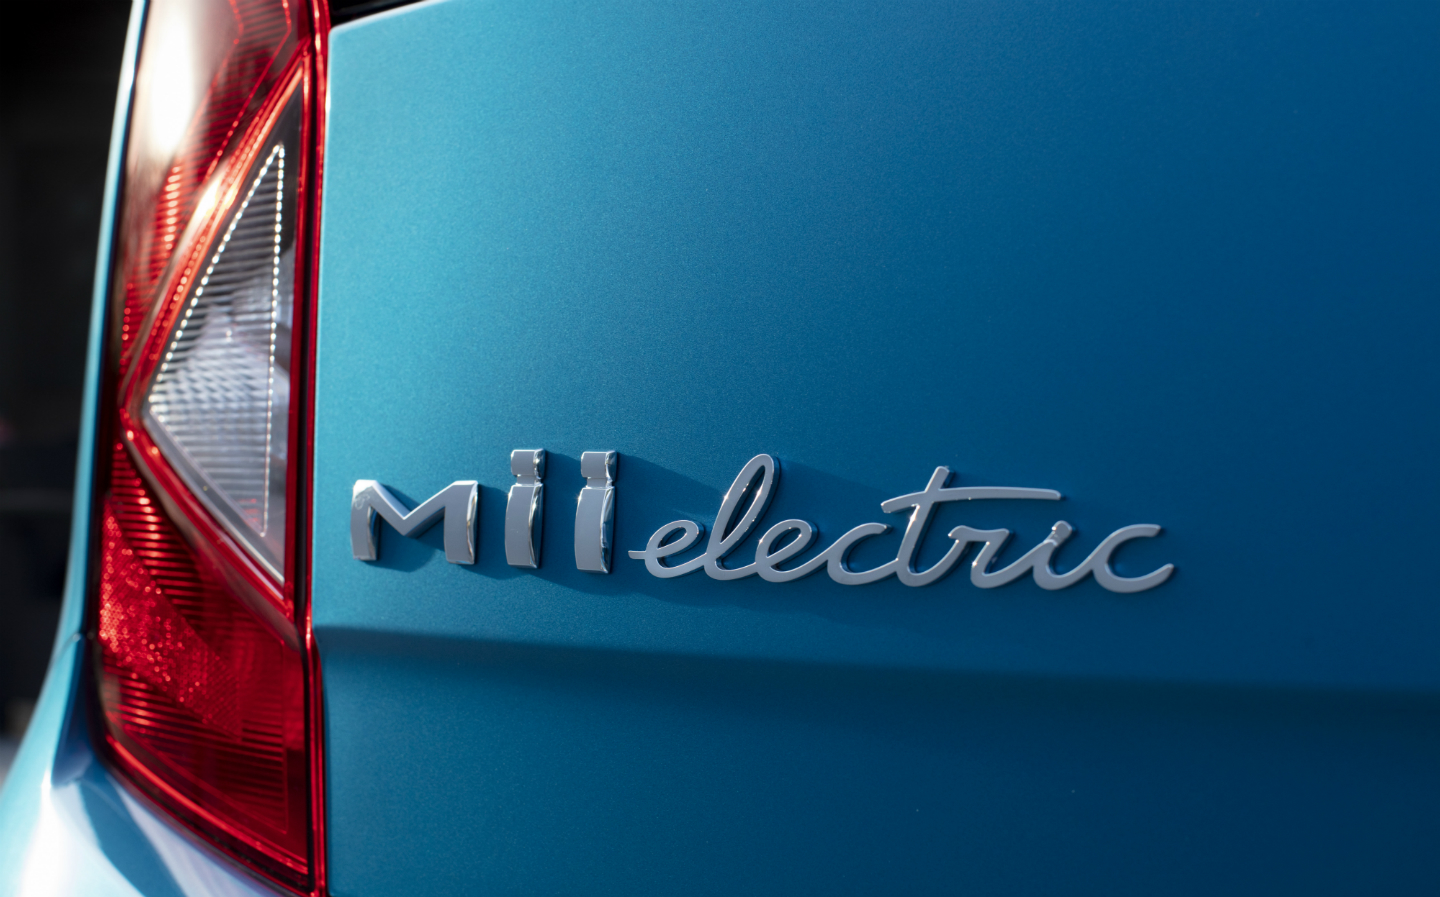 SEAT Mii electric: design, engine and features of the new EV